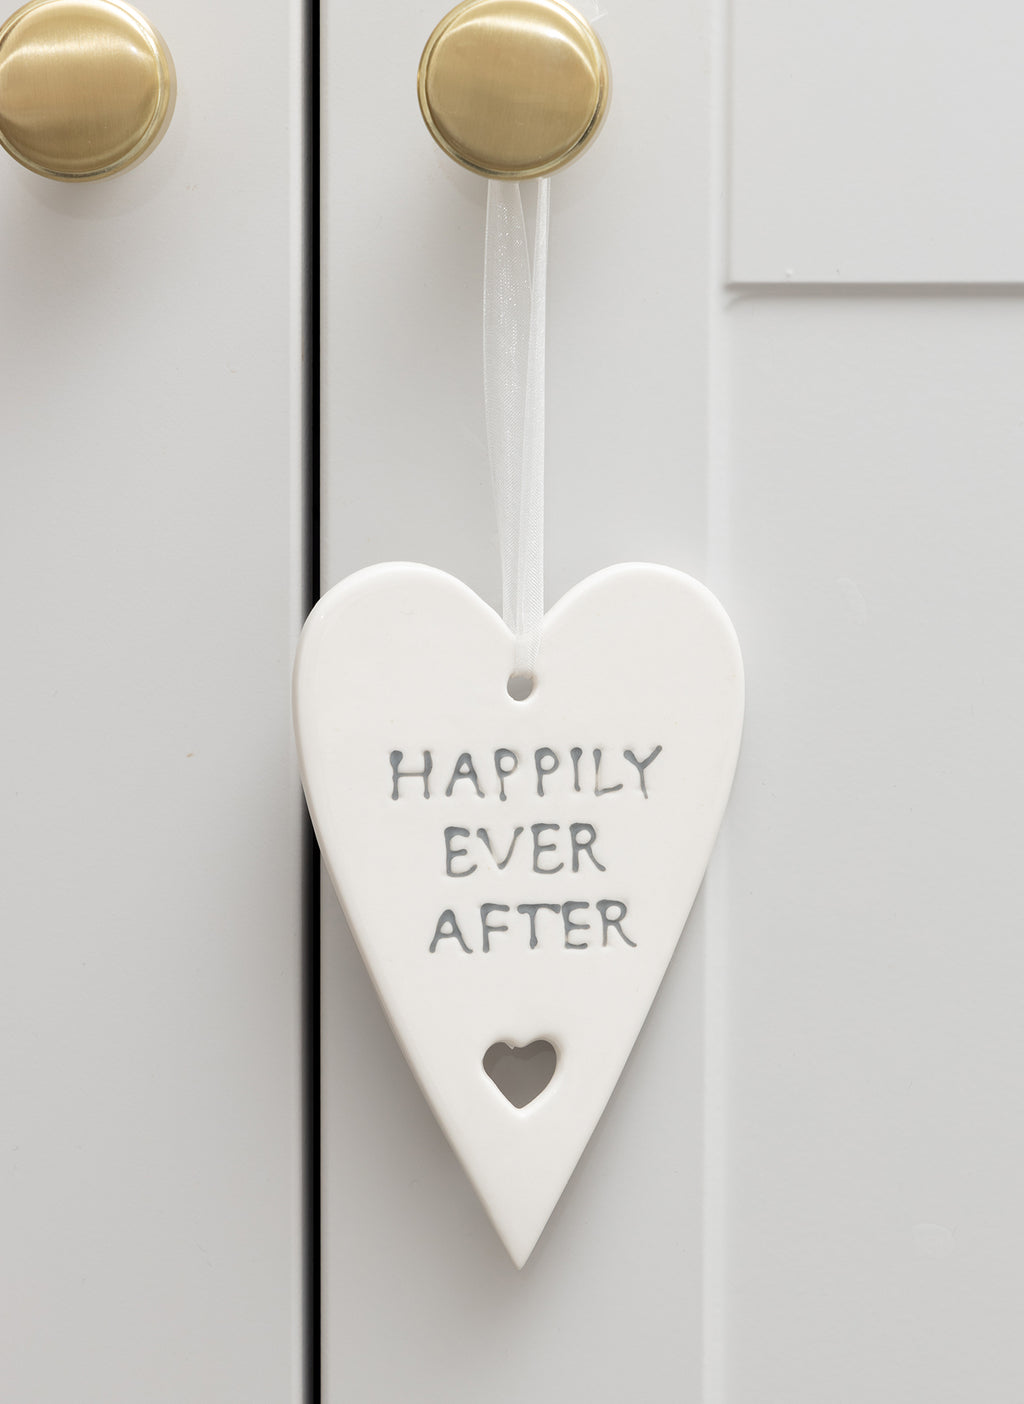 Happily Ever After Hanger